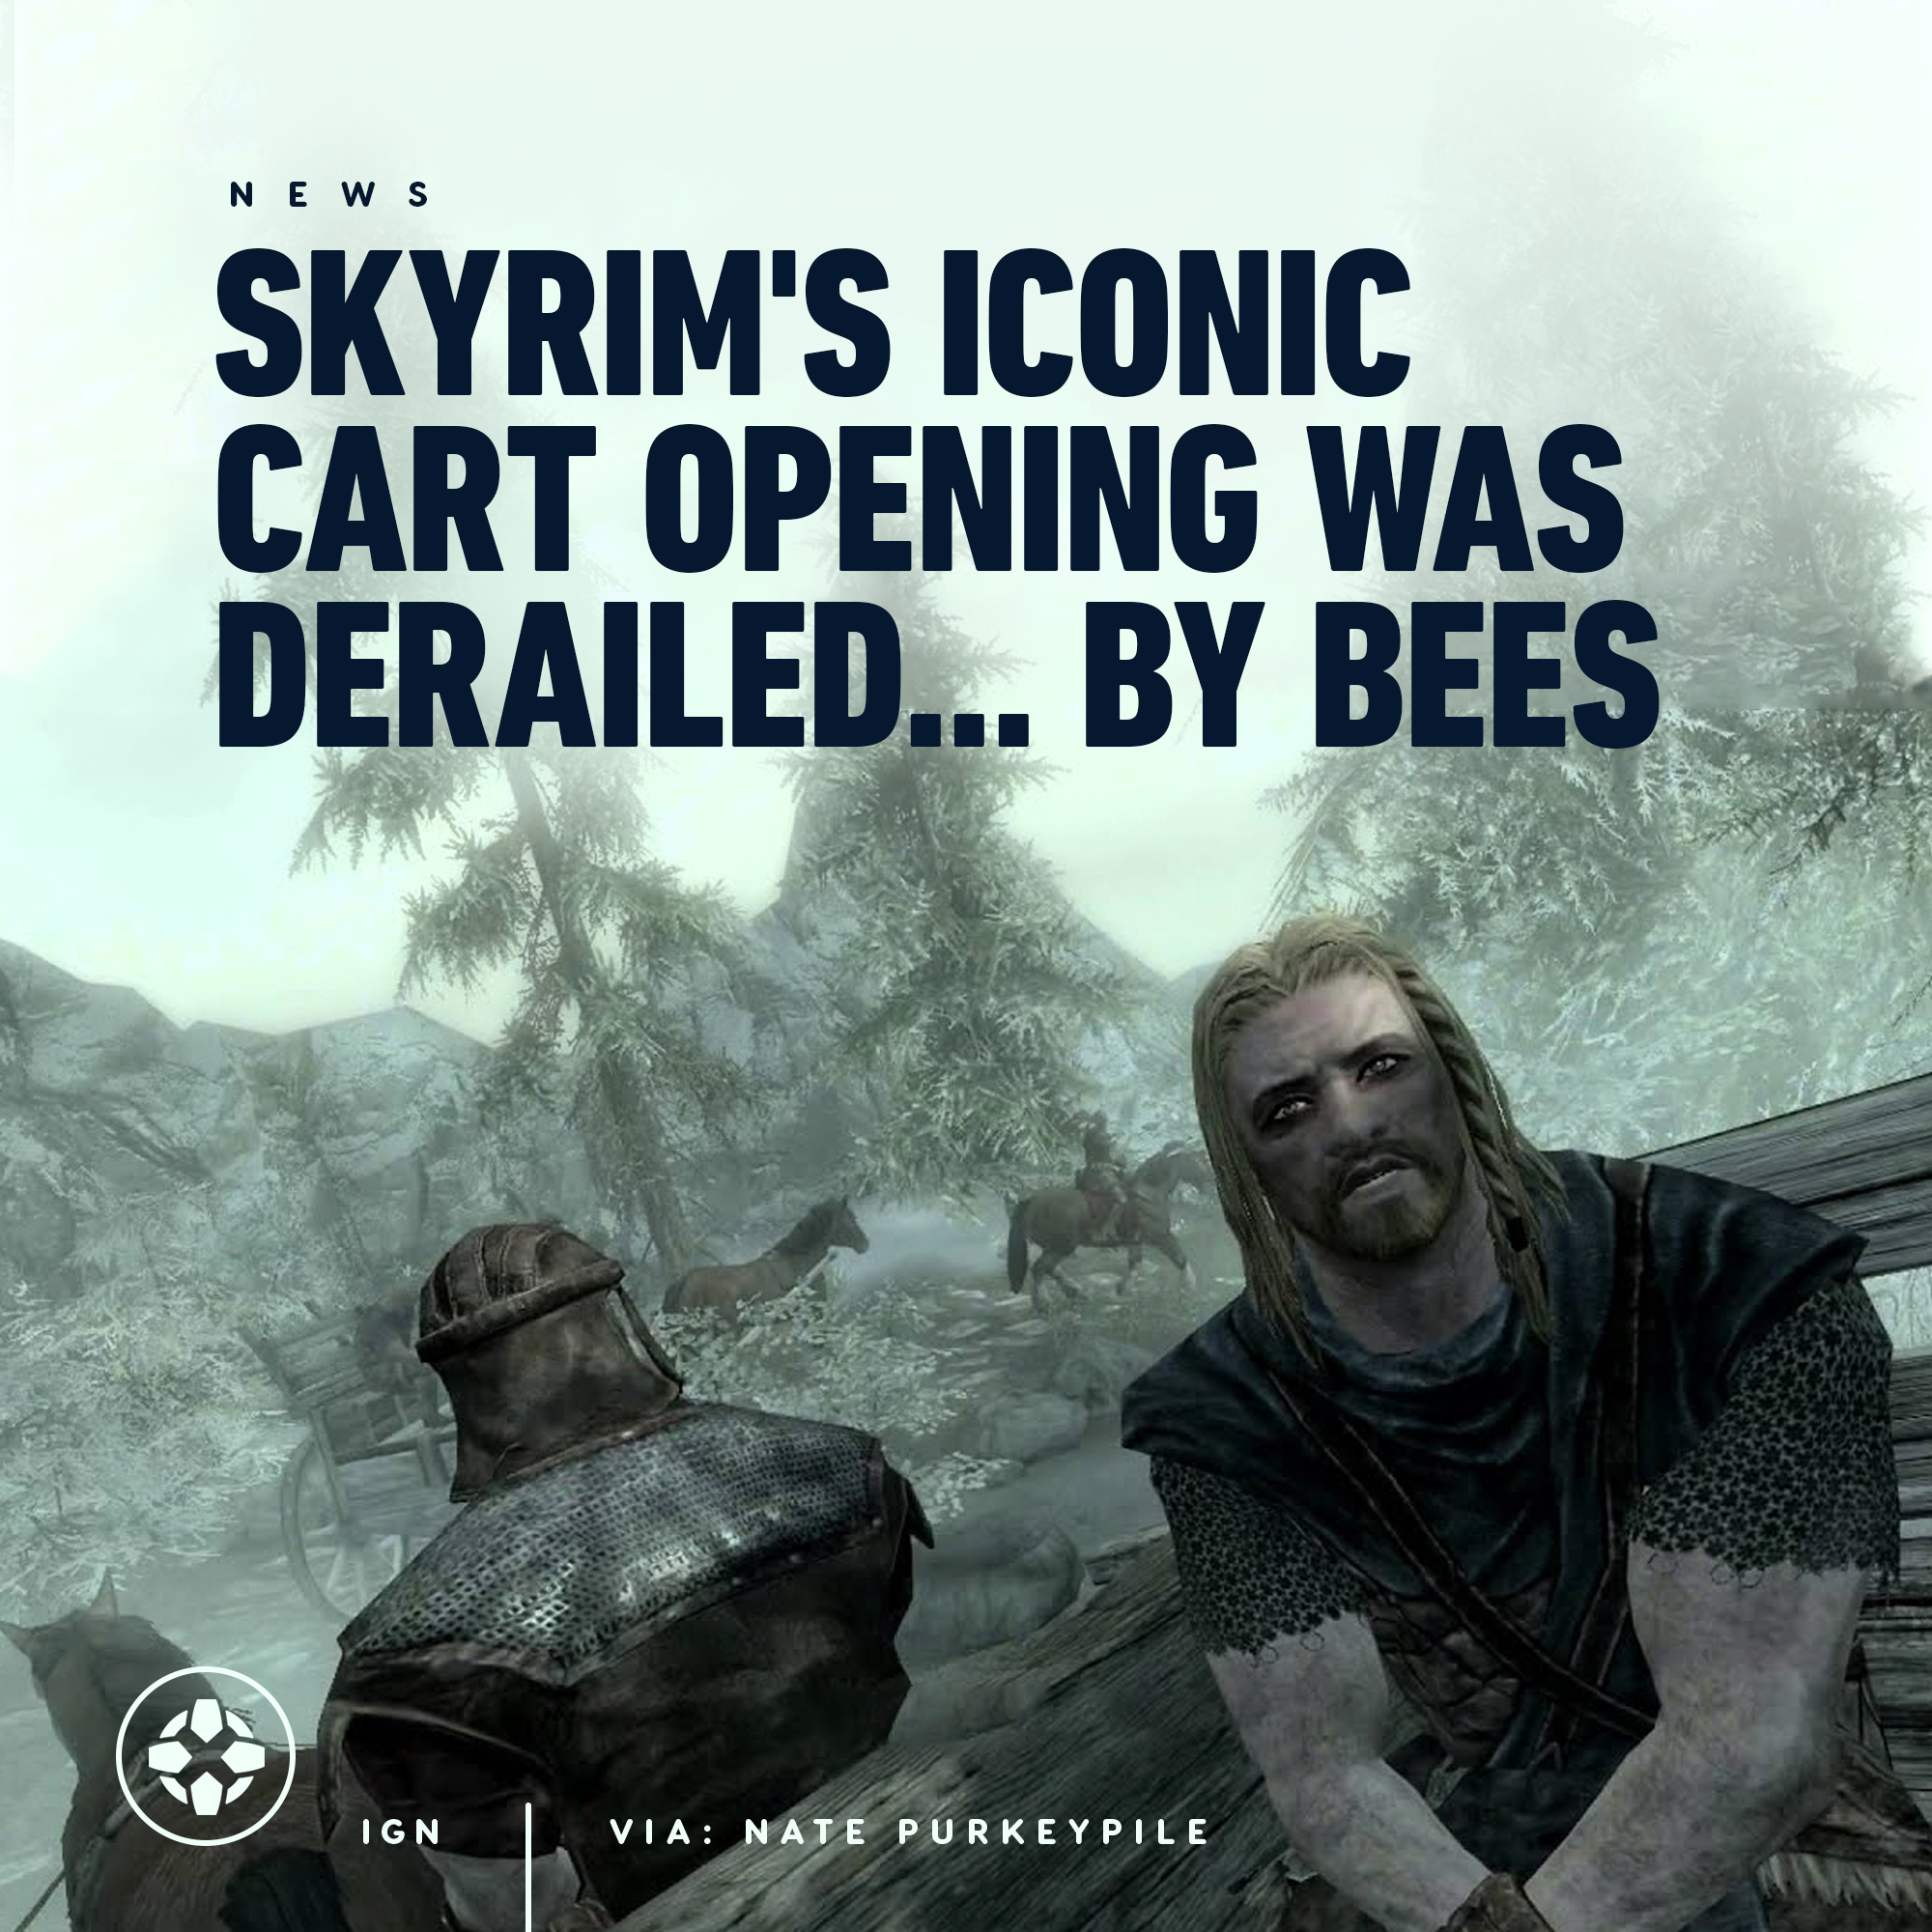 Ign You Re Finally Awake At One Point In Skyrim S Development Bees Couldn T Be Picked Up And If One Happened To Cross The Path Of The Cart From The Opening Sequence